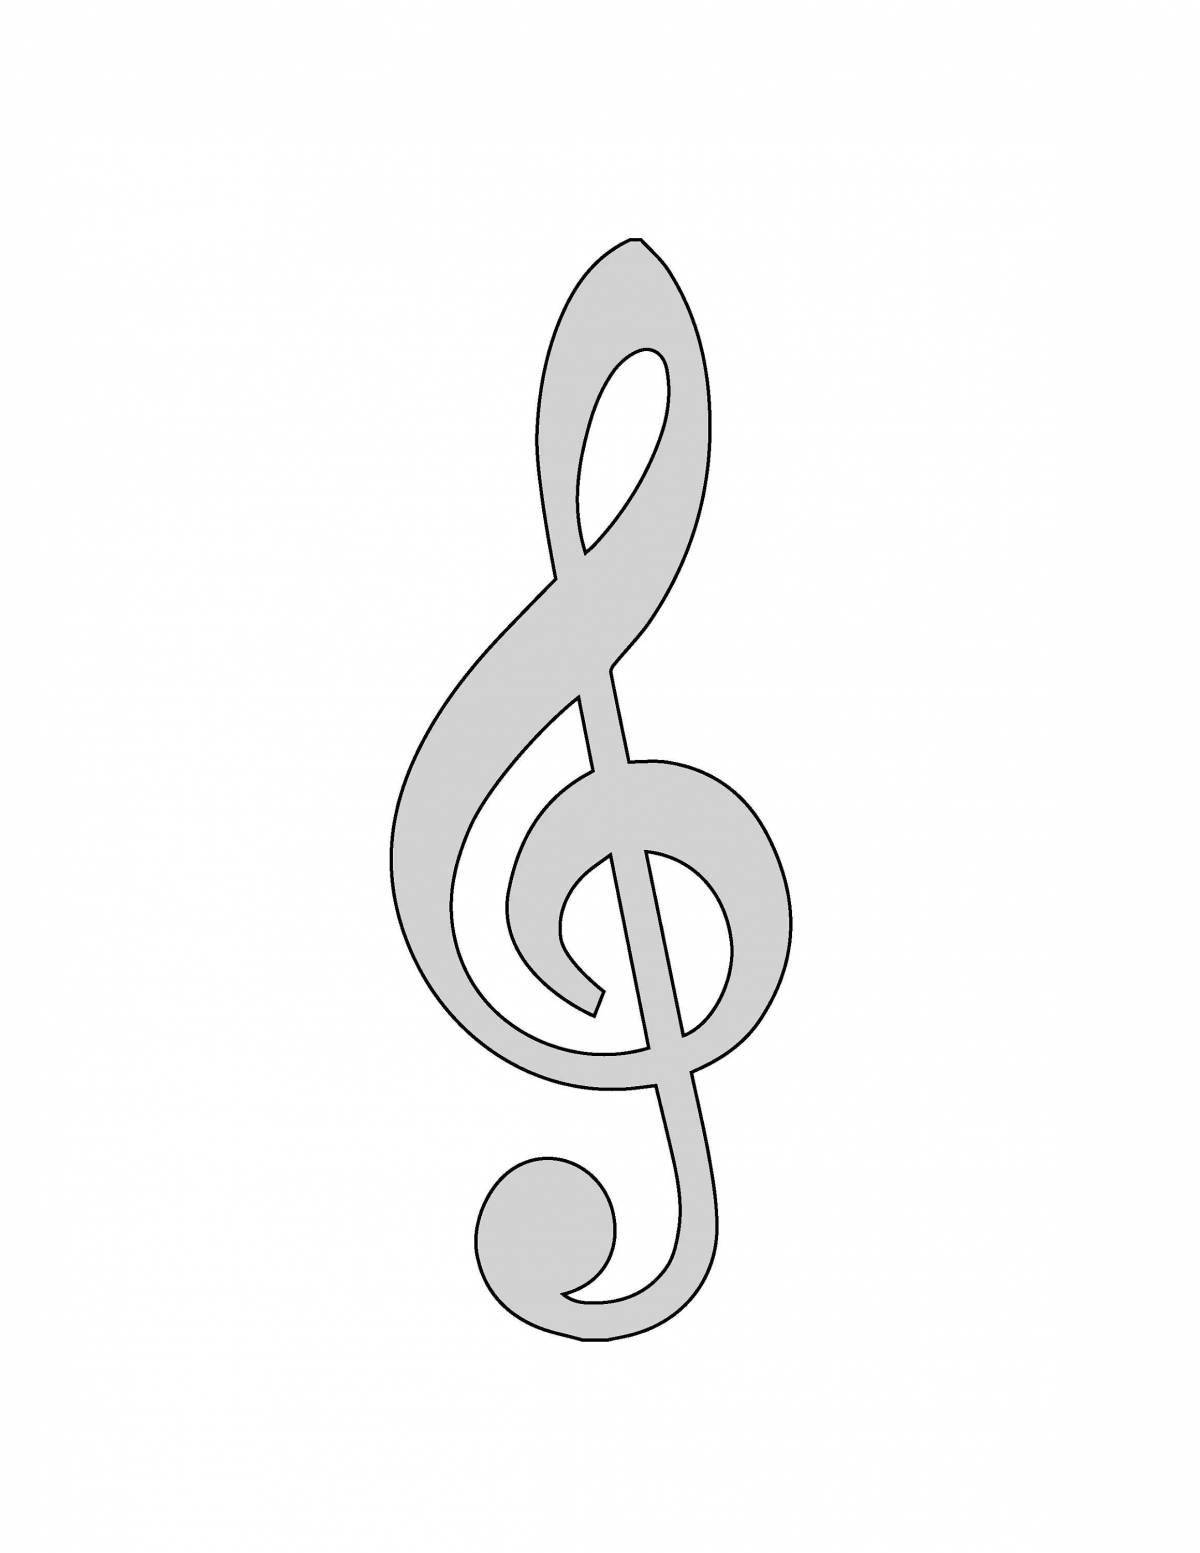 Adorable treble clef for kids